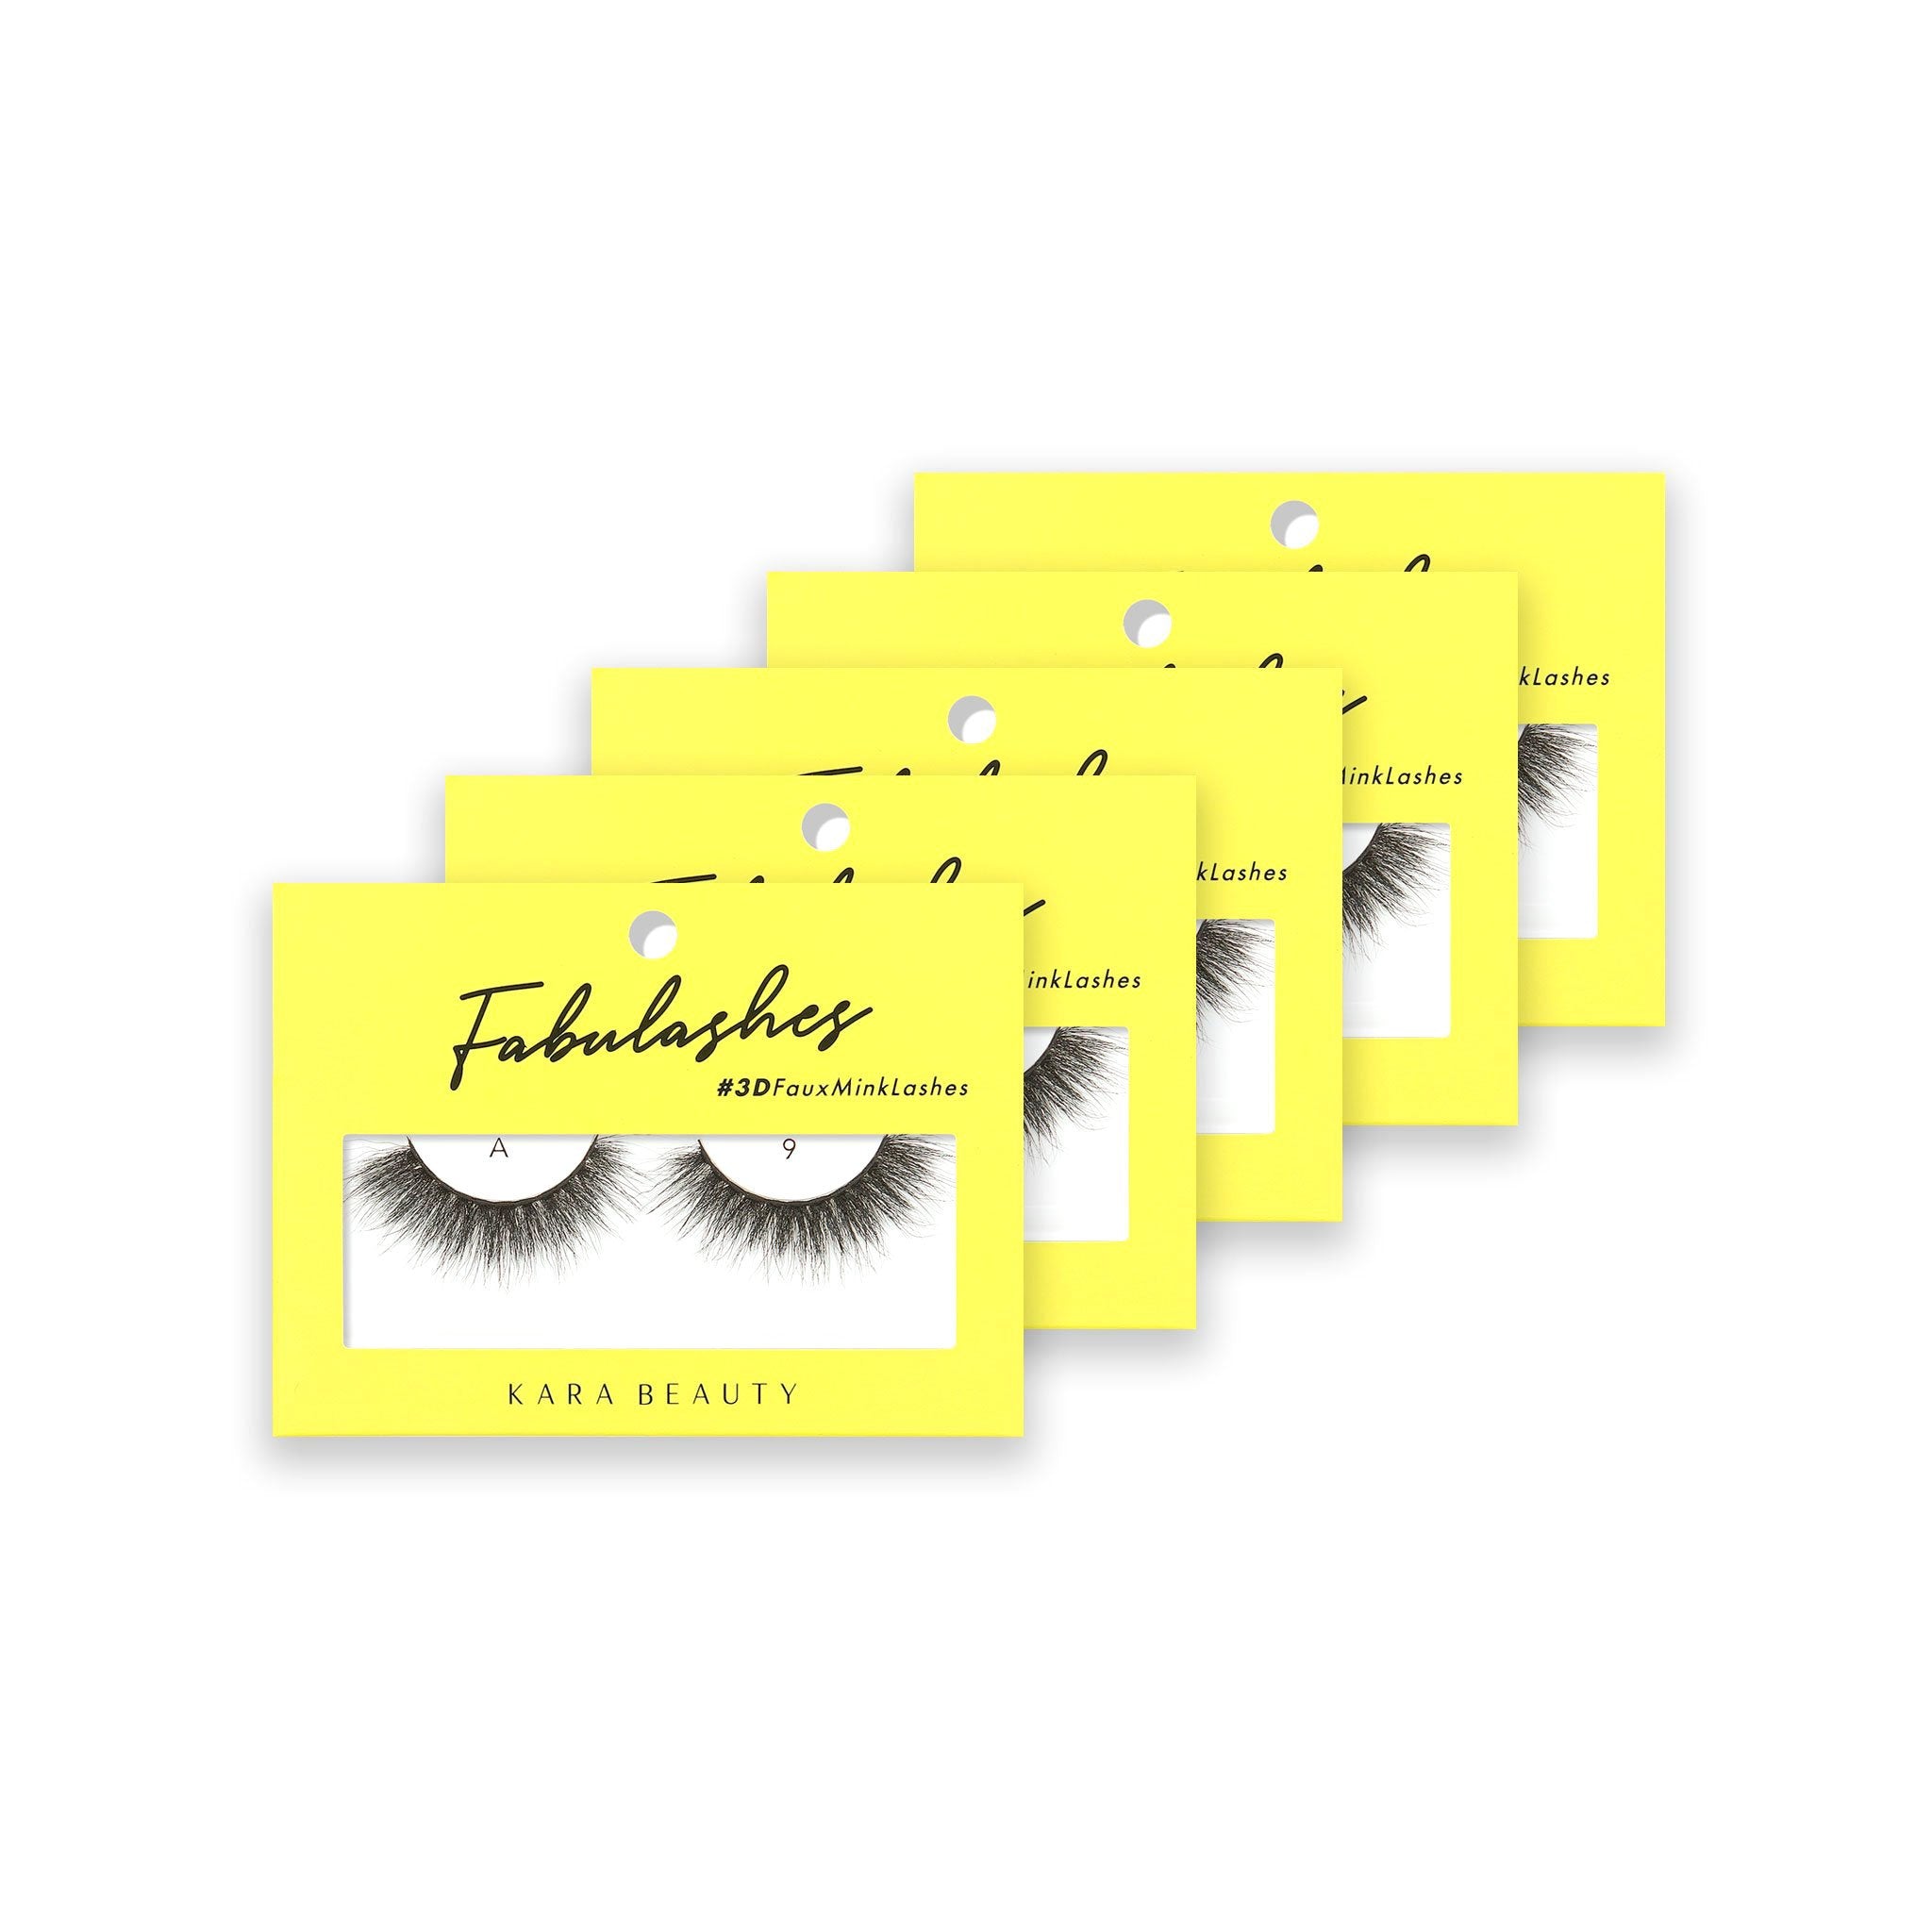 Style A9 Fabulashes 3D faux mink strip eyelashes 5 pack